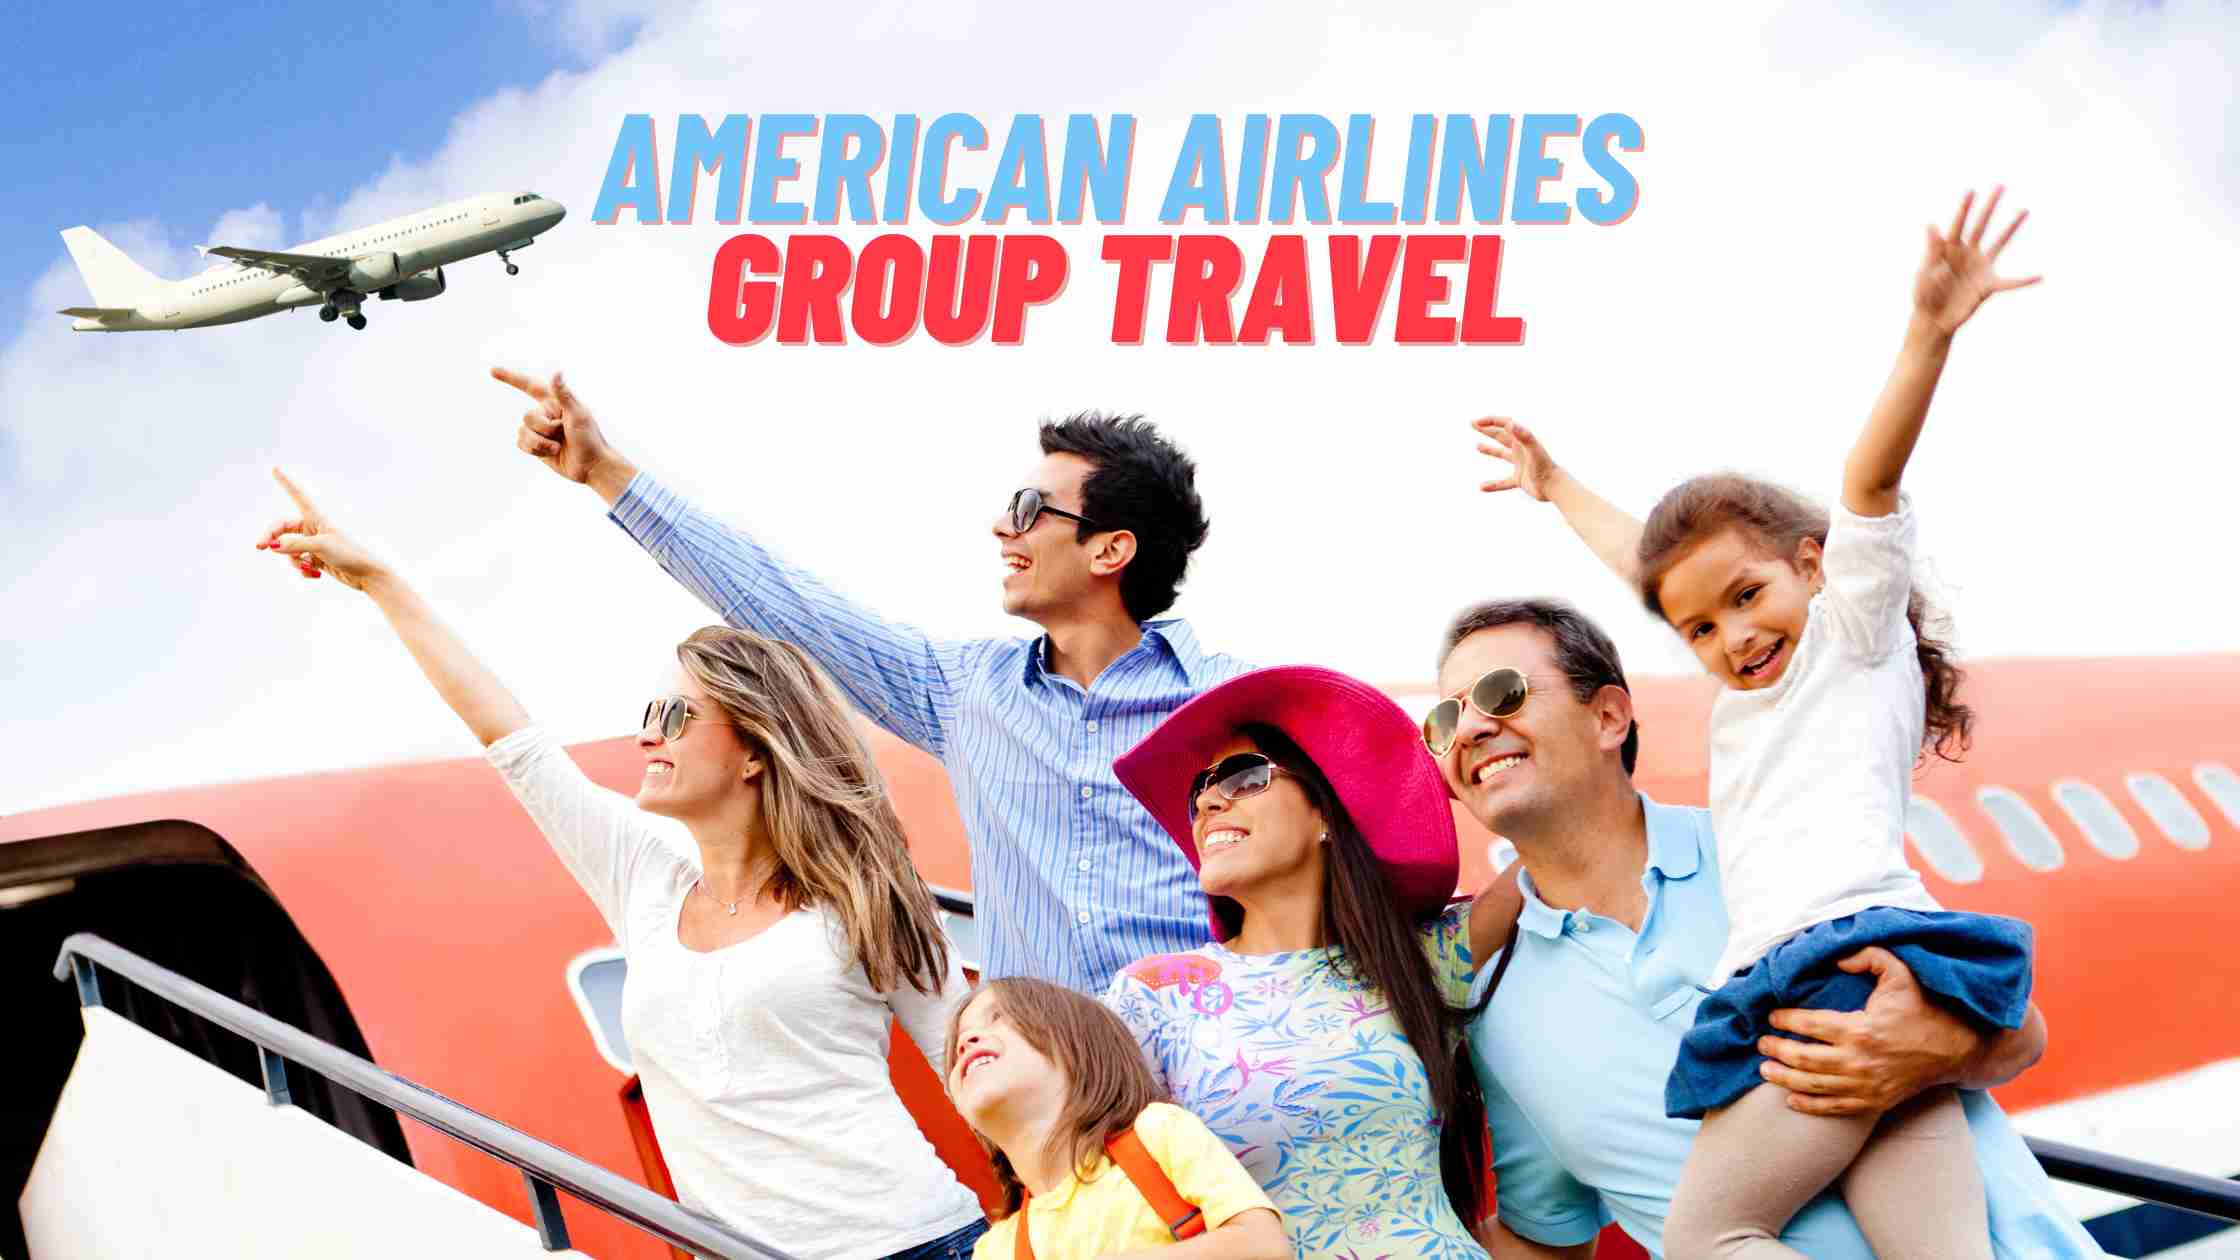 How Do I Book American Airlines Group Travel Booking?